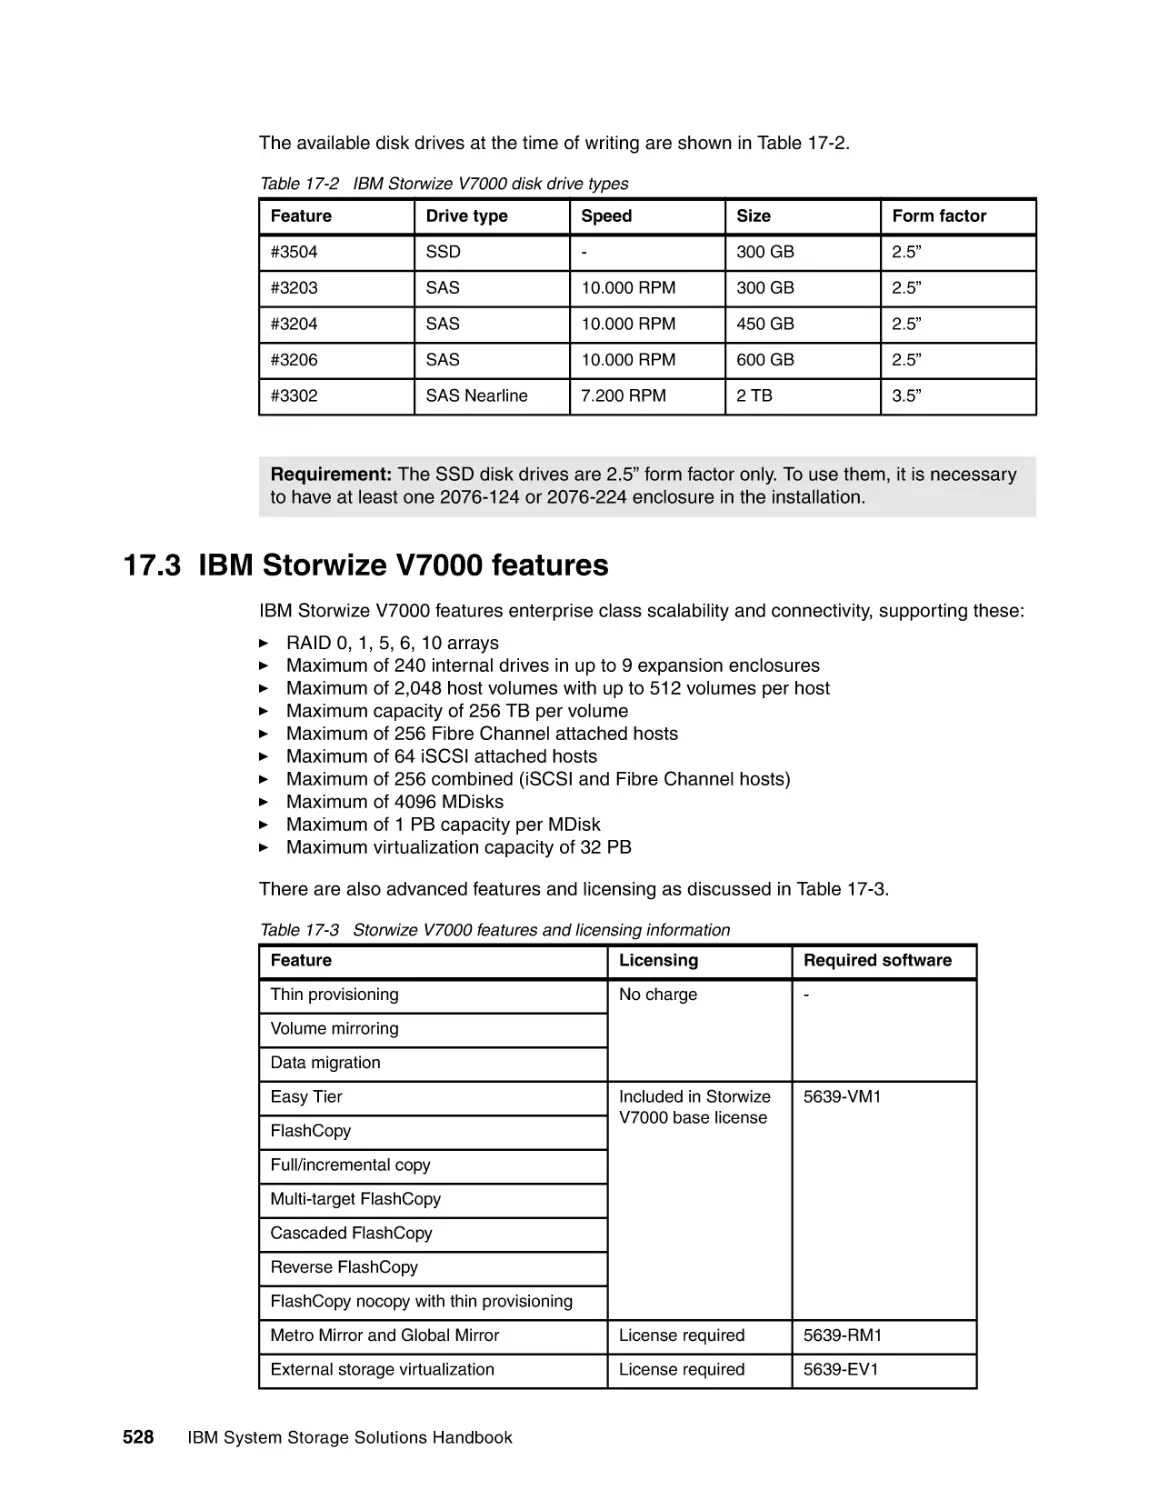 17.3 IBM Storwize V7000 features